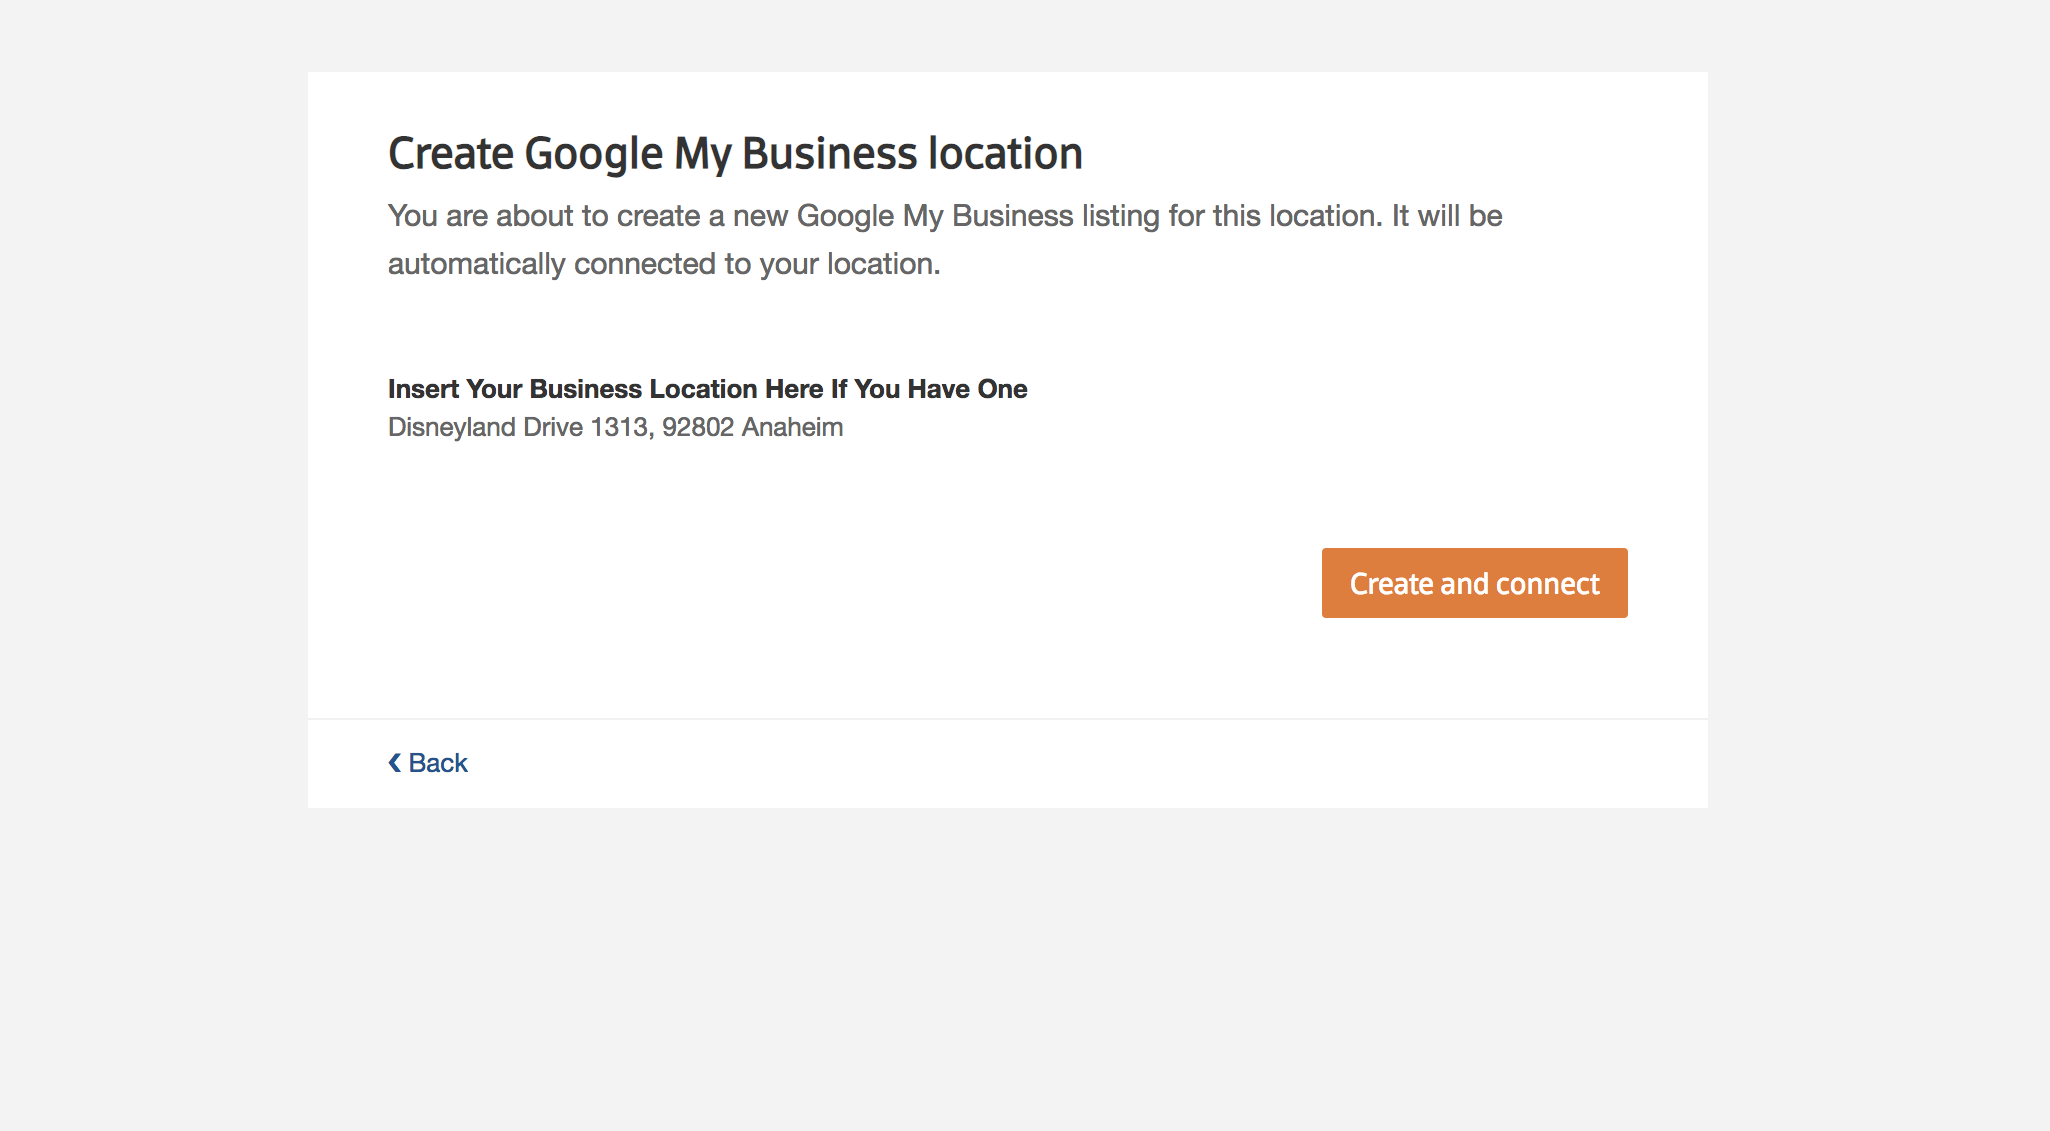 Display of Google Confirming Your Request to Access your online business listing information